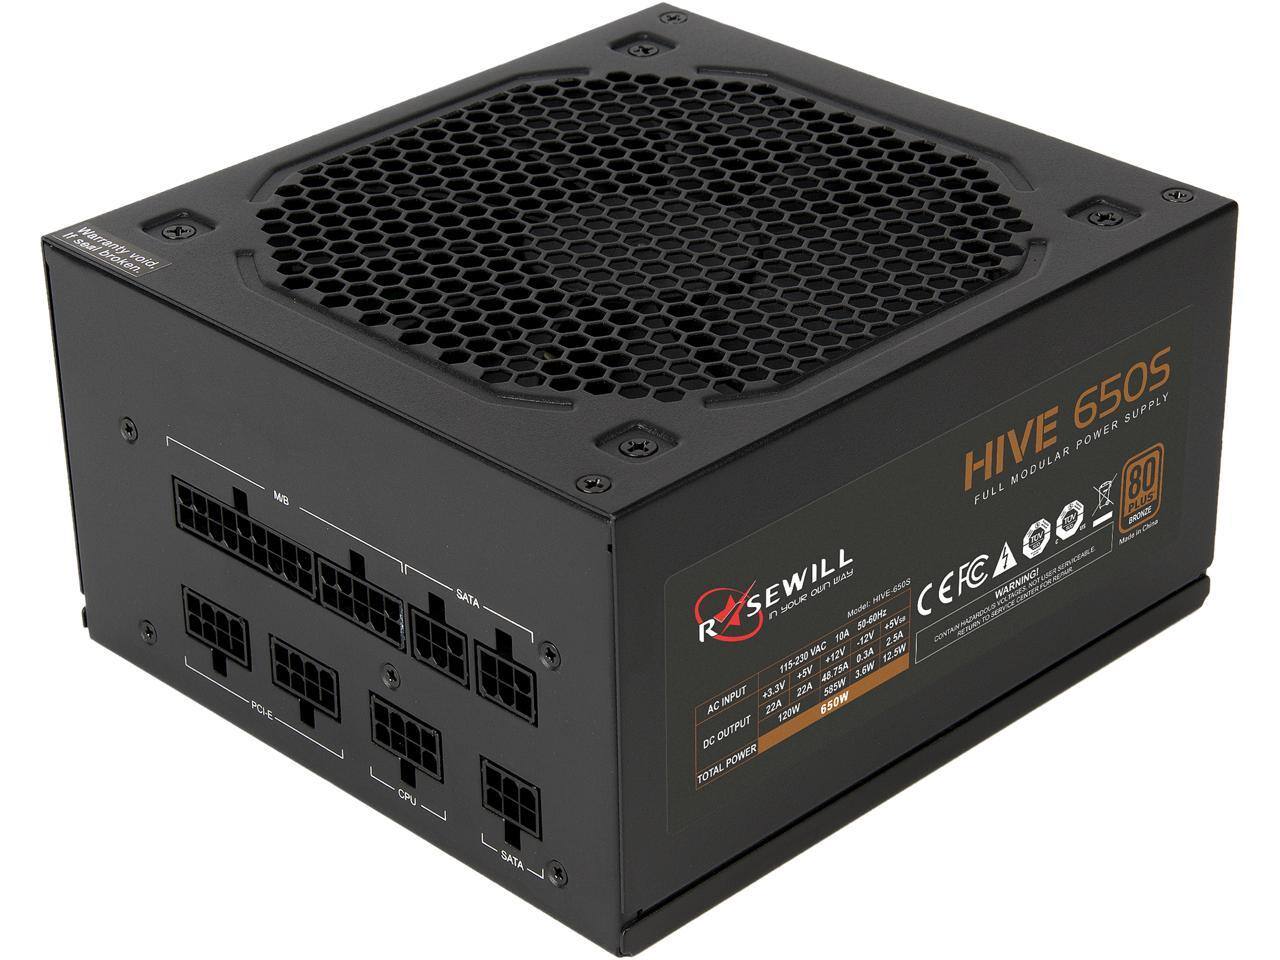 Rosewill Hive Series 650W Modular Gaming Power Supply, 80 PLUS Bronze Certified for $62.99 + FS